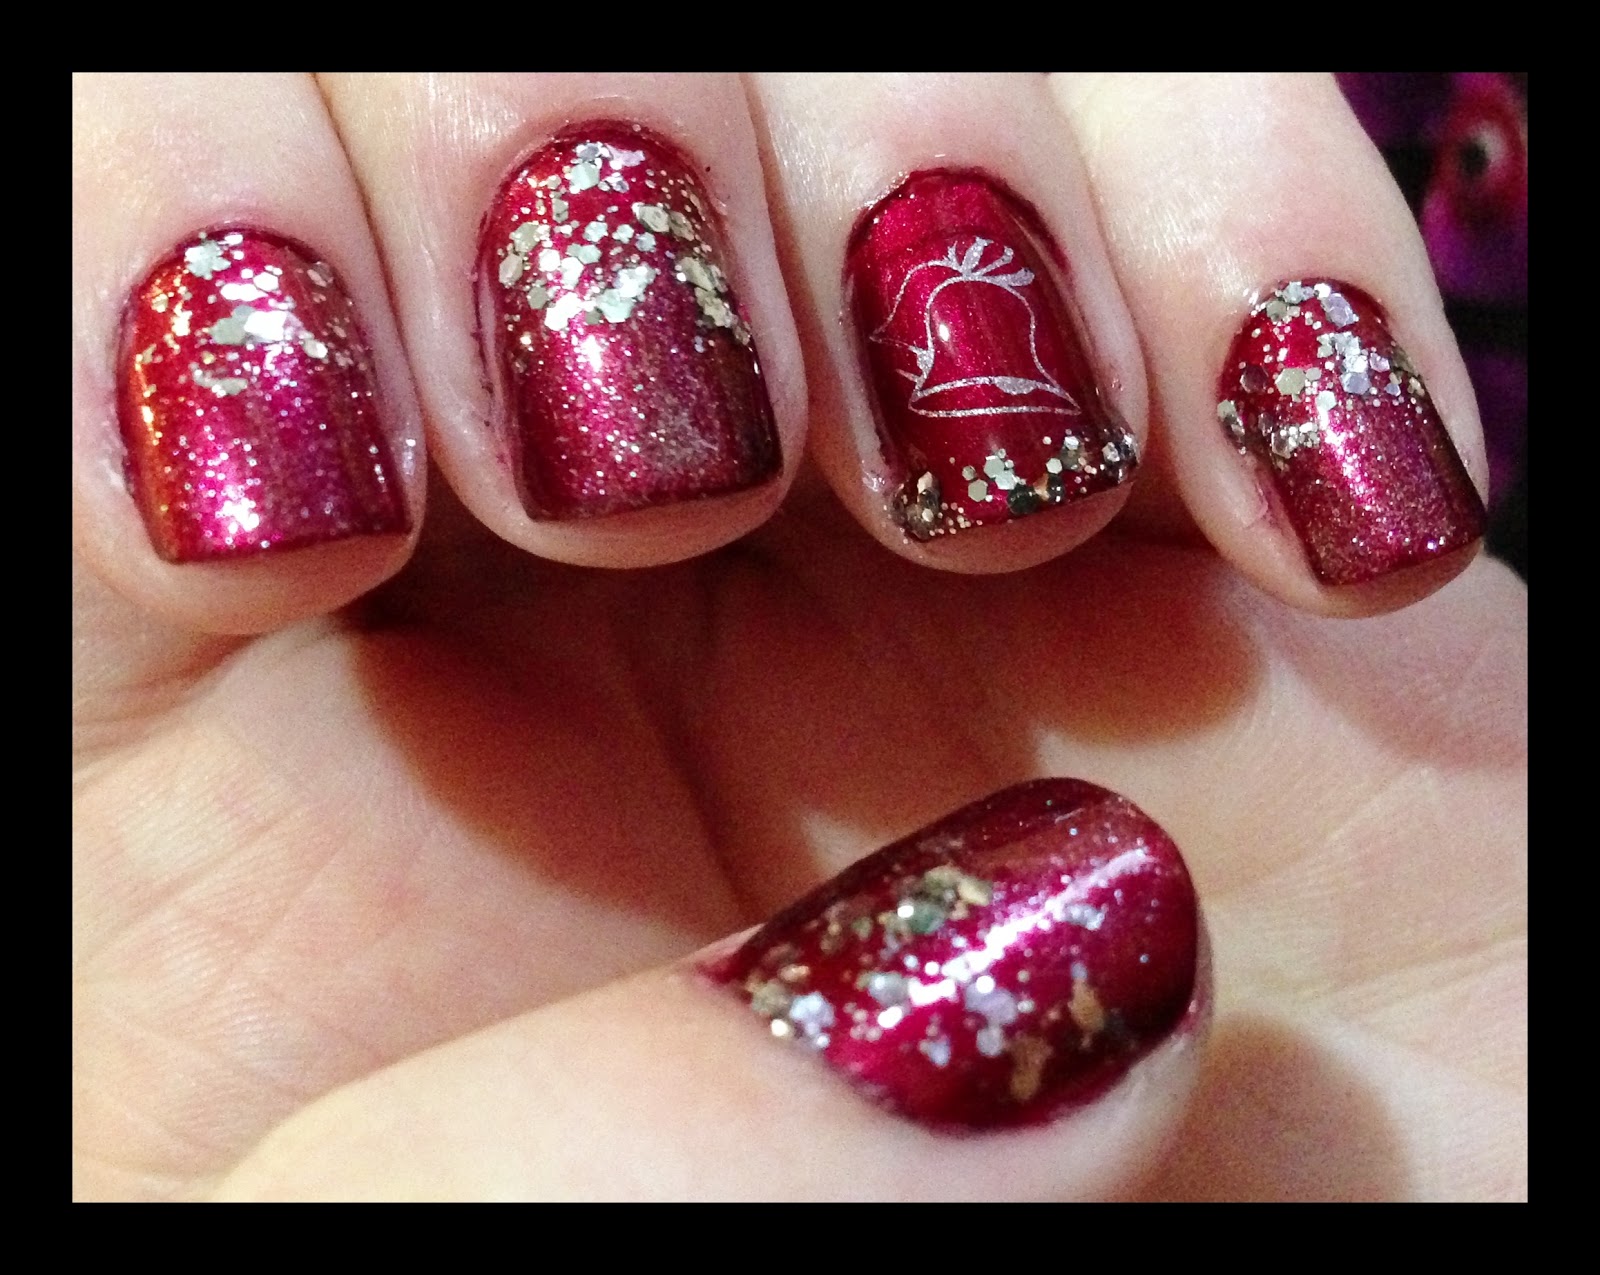 6. "Merry Manicures" December Dip Nail Colors - wide 4